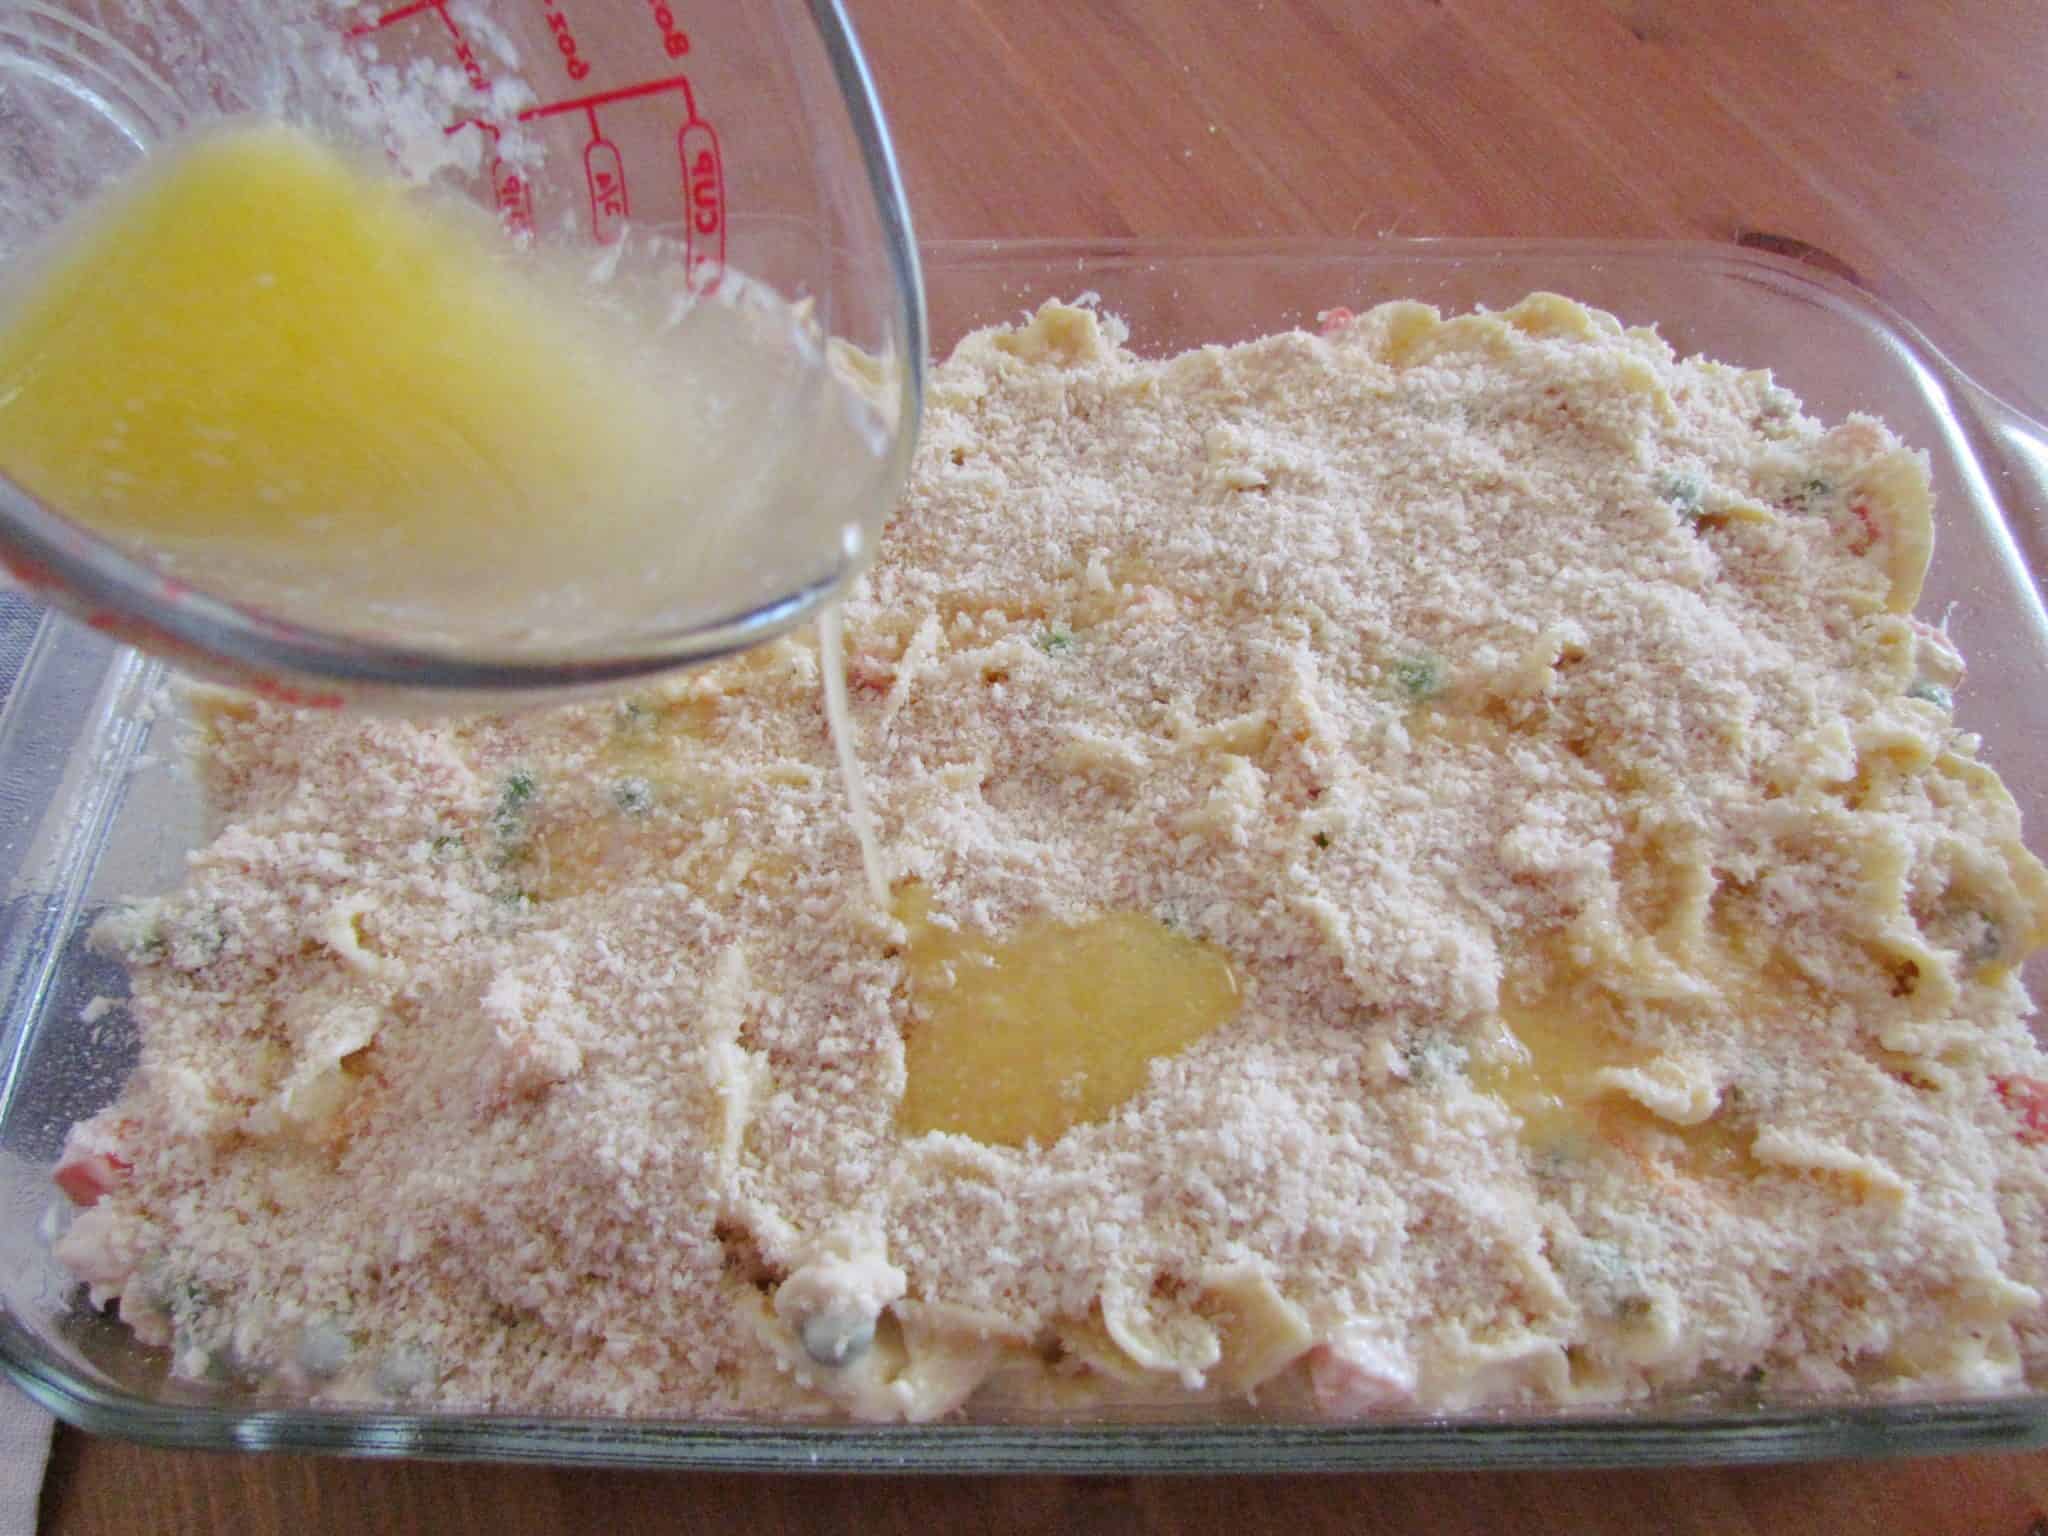 pouring melted butter on top of panko bread crumbs.